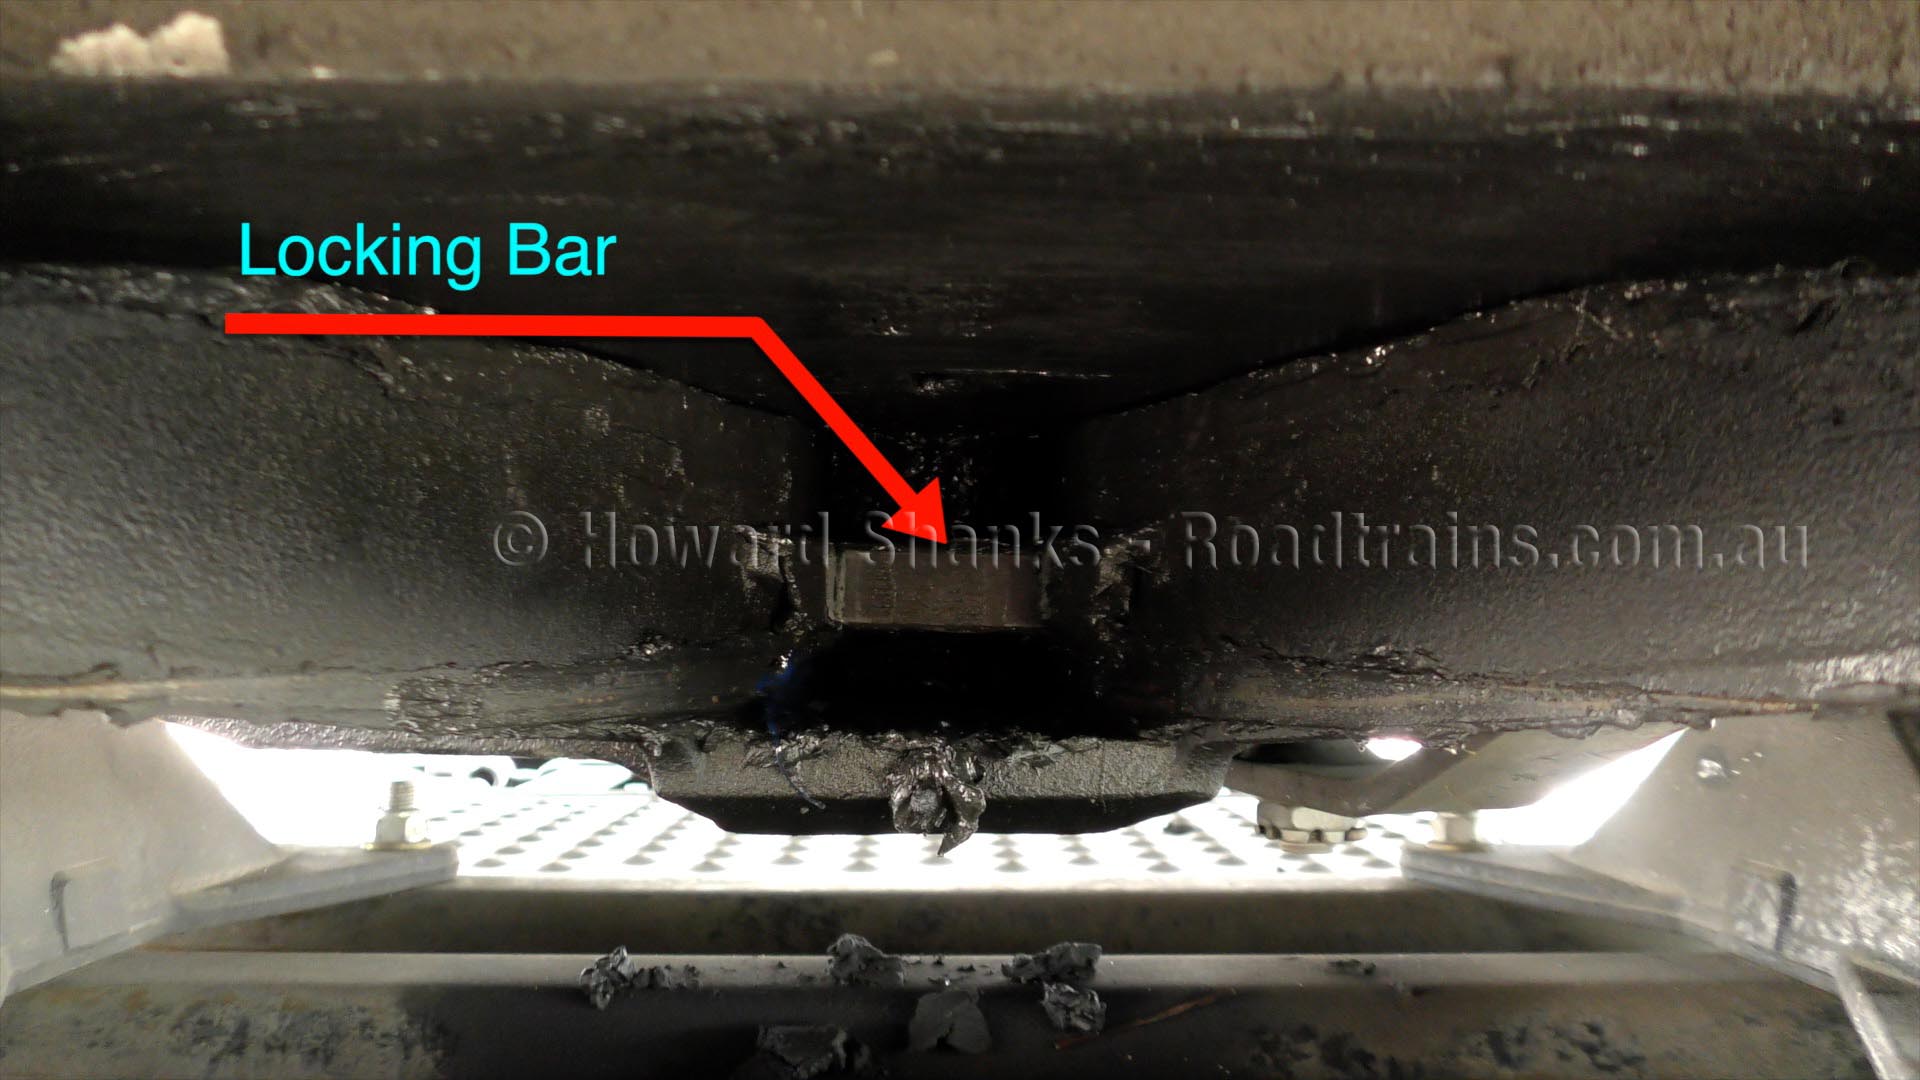 Check locking bar is across the King pin and there is no air gap between the top of the fifth wheel and trailer skid plates